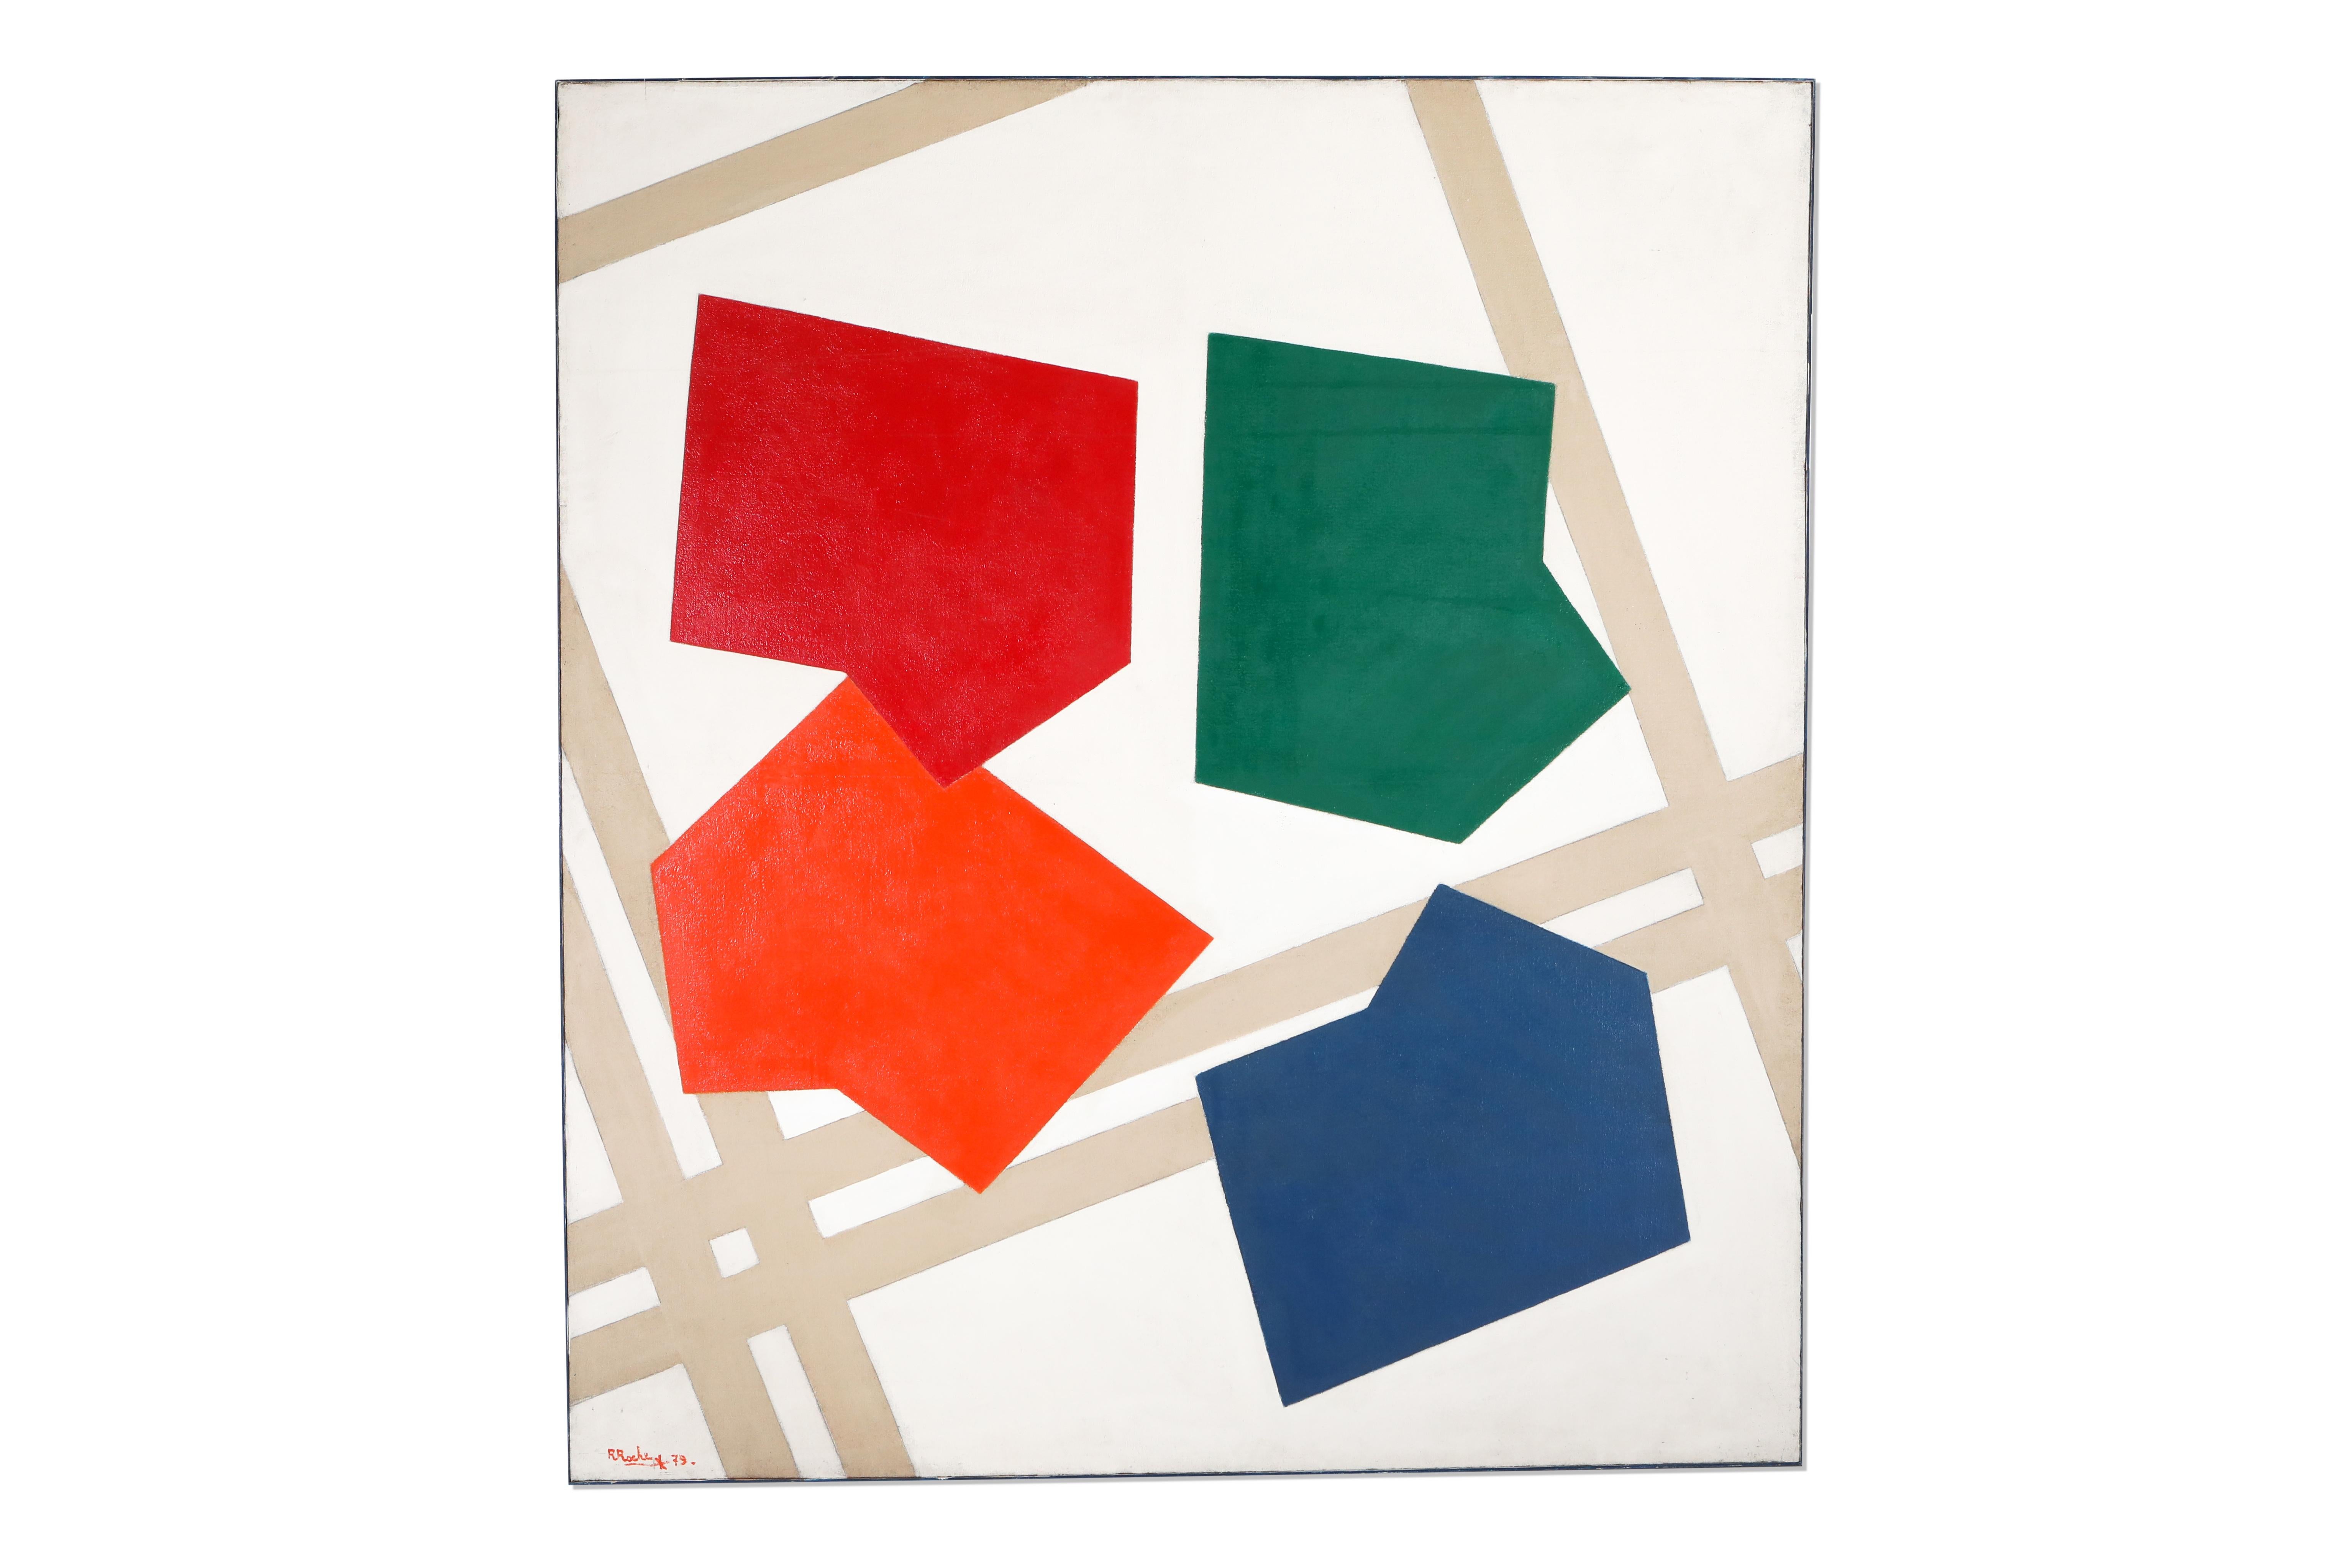 Painting by René Roche; 1979; Contemporary Painting; Post-war Artwork; Graphic Artwork; France; 

Exhibited in the exhibition 'Espace et abstraction' in Palais Saint-Jean in Lyon, France in 1979.

René Roche was born in Vienne, France, in 1932.